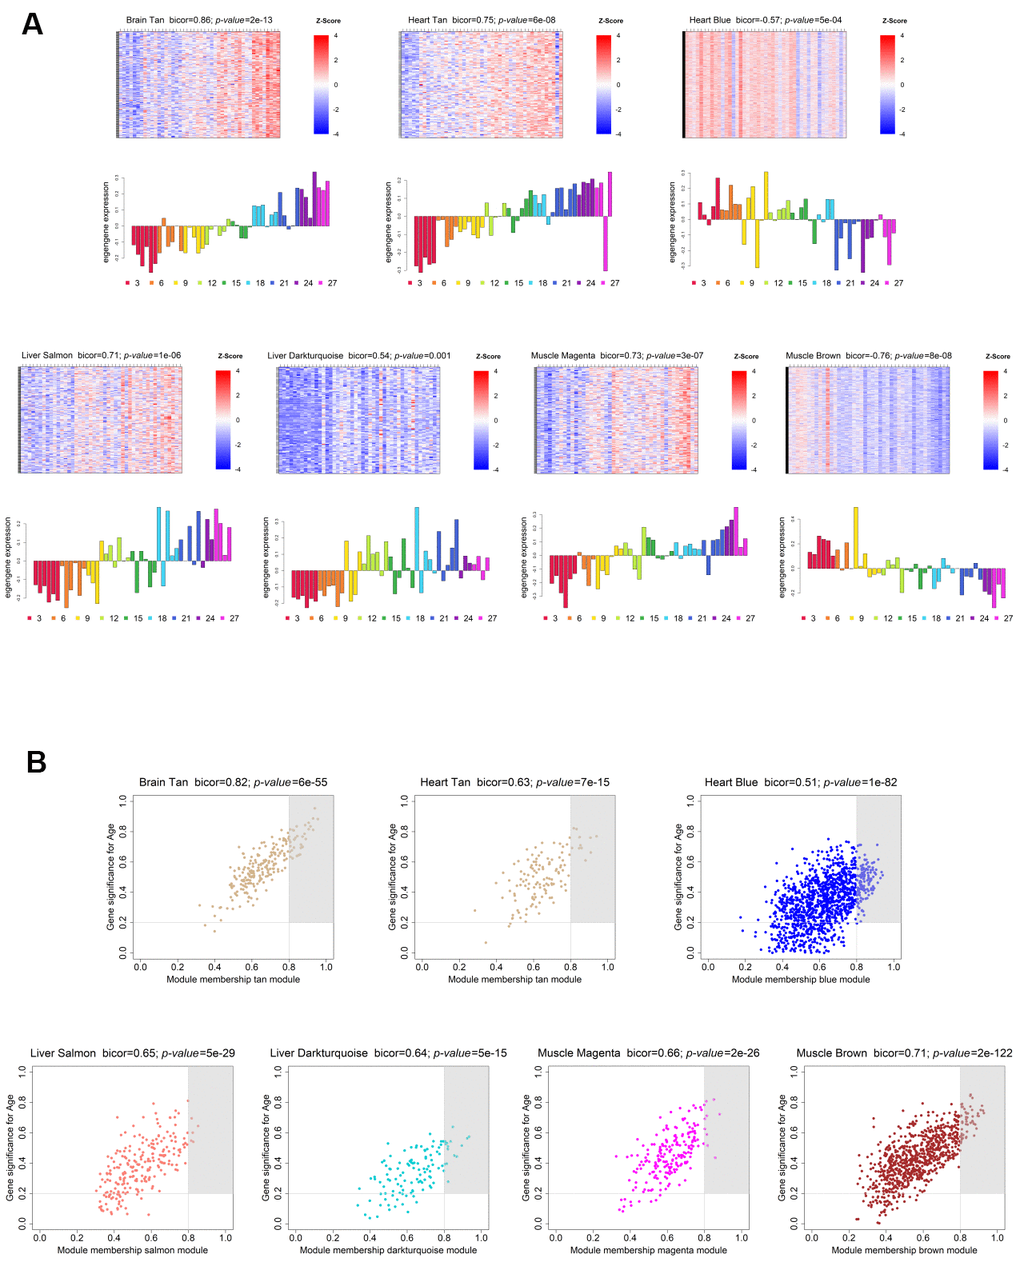 Weighted gene co-expression network significantly age-associated modules. (A) Gene expression profile of each significantly age-associated module. The heatmaps (top) display the standardized expression (z-score) of individual genes (rows) per sample (columns), whereas the bar plots (below) represent the ME expression profile. Each bar of the bar plot corresponds to the same samples of the heatmap. Negative (positive) values of ME expression relate to the under-expression (over-expression) of genes in each module’s heatmap (blue and red colors, respectively). (B) Intramodular hub gene identification. For each module, genes with individual GS > 0.2 and MM > 0.8 were considered to be the most functionally important (inside grey rectangles).